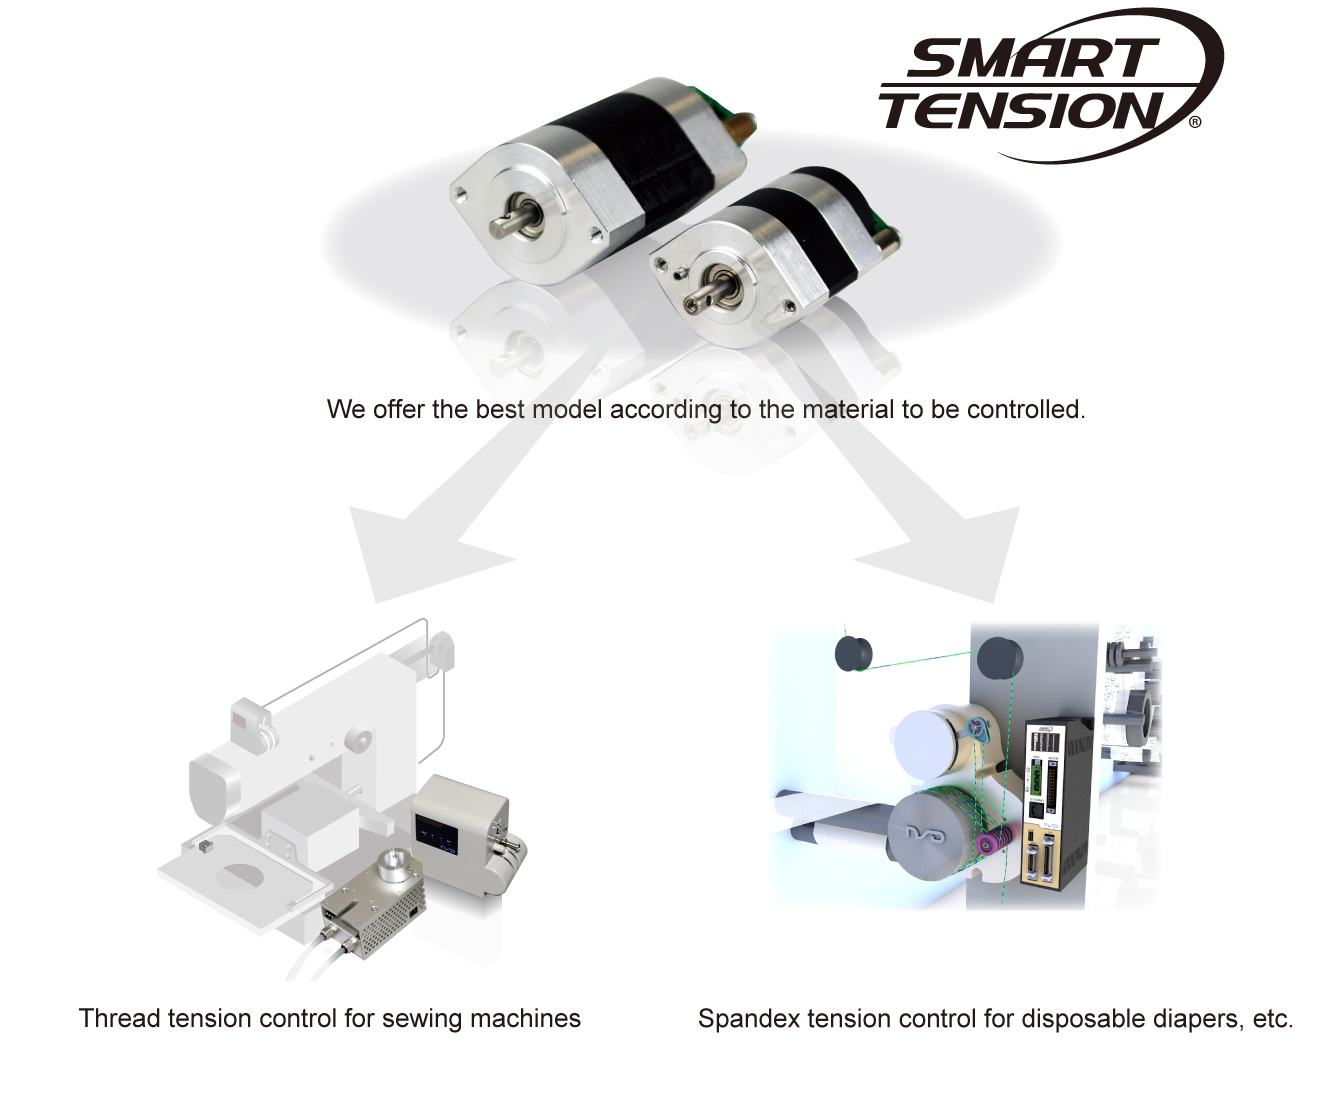 SMARTTENSION®　We offer the best model according to the material to be controlled. 
				Thread tension control for sewing machines, Spandex tension control for disposable diapers, etc.